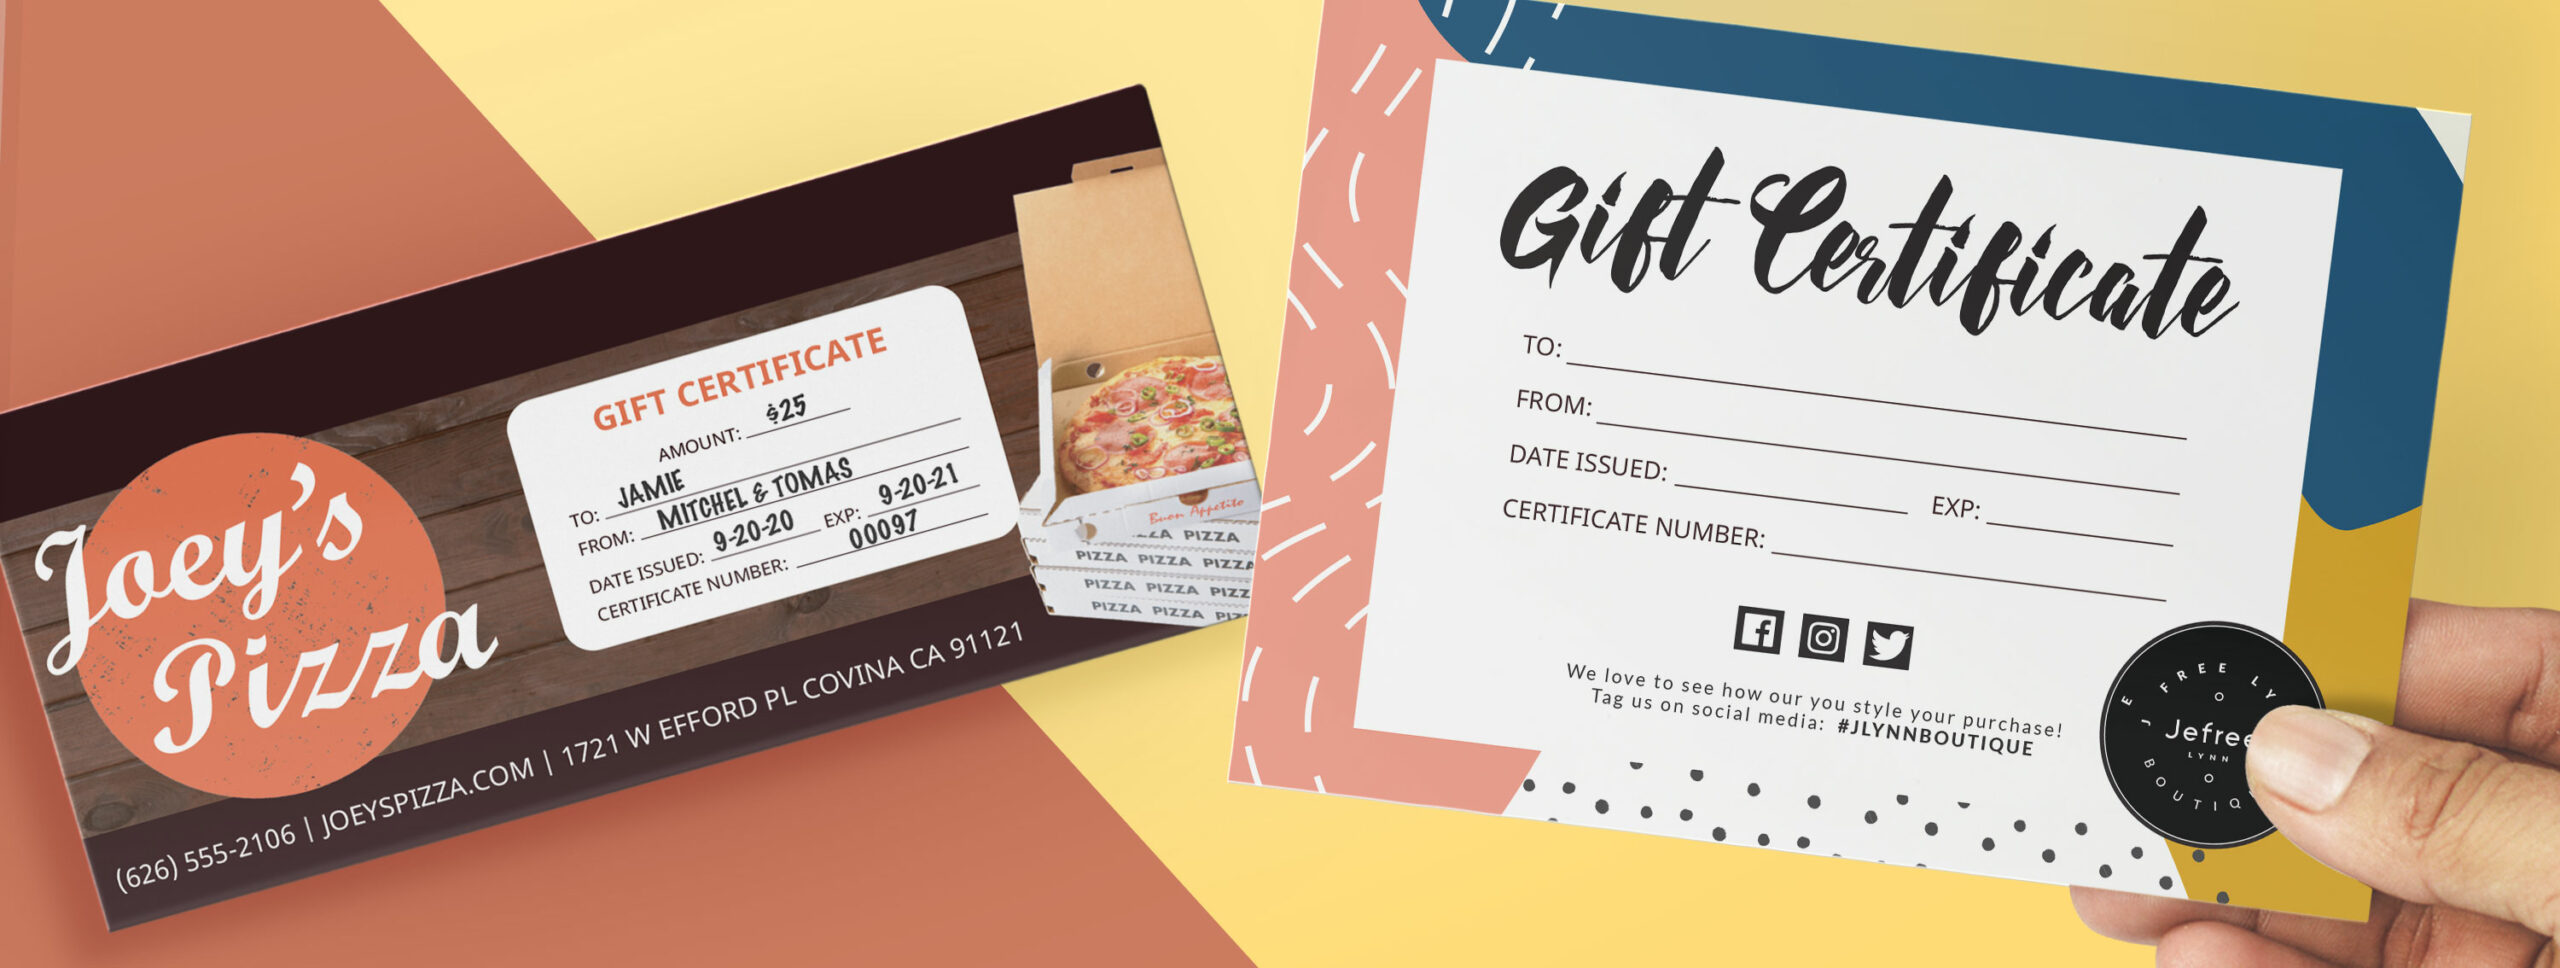 Gift Certificate Template Gift Voucher Template Gift Certificate